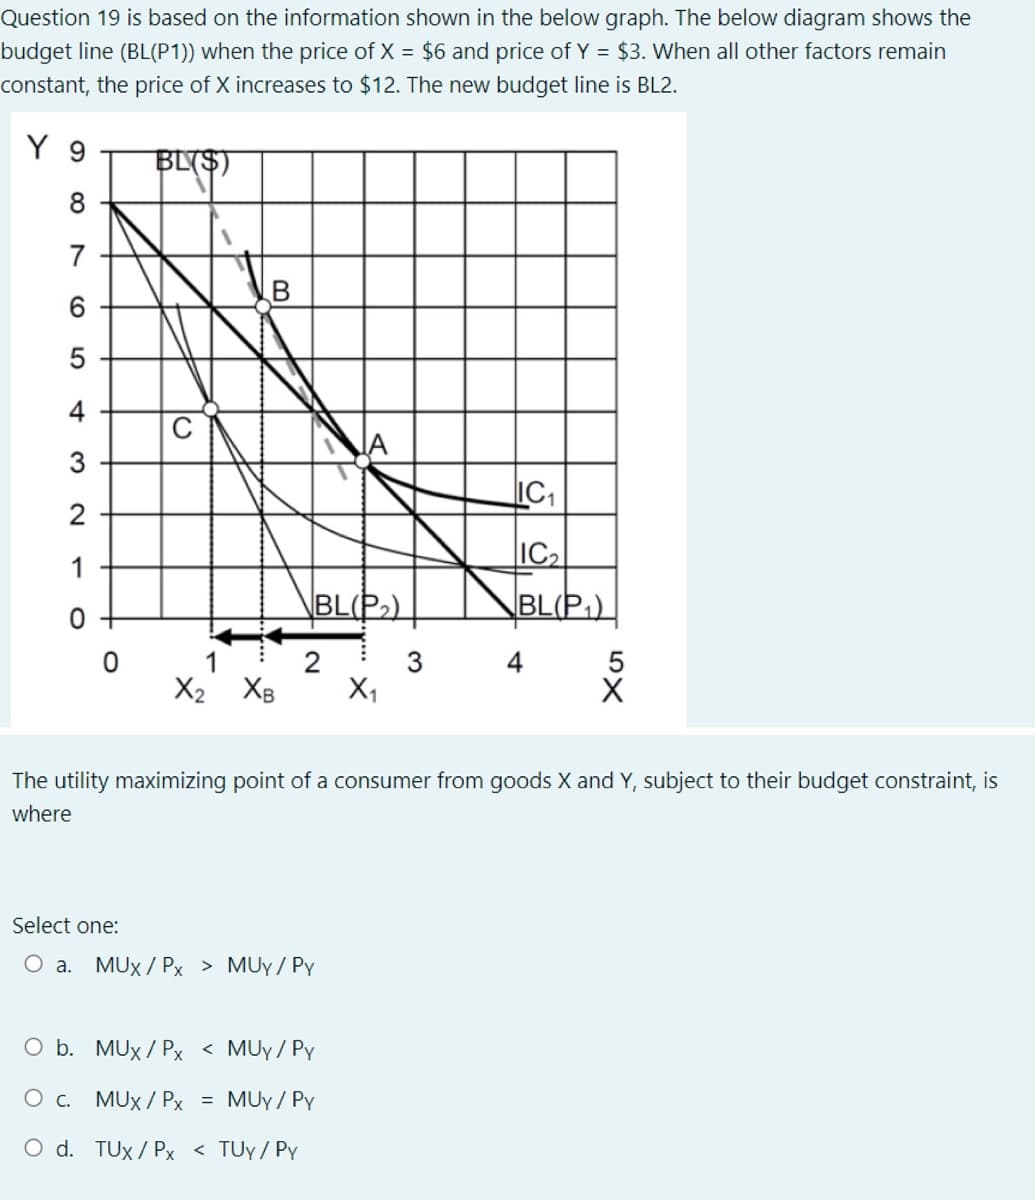 Question 19 is based on the information shown in the below graph. The below diagram shows the
budget line (BL(P1)) when the price of X = $6 and price of Y = $3. When all other factors remain
constant, the price of X increases to $12. The new budget line is BL2.
Y 9
BLY$)
8
7
B
5
4
3
C,
1
BL(P»)
BL(P:)
1
2
X2 XB
X1
The utility maximizing point of a consumer from goods X and Y, subject to their budget constraint, is
where
Select one:
O a. MUx / Px > MUy / PY
O b. MUx / Px < MUy / Py
O c. MUX / Px
= MUy / PY
O d. TUX / Px < TUy/ Py
2.
